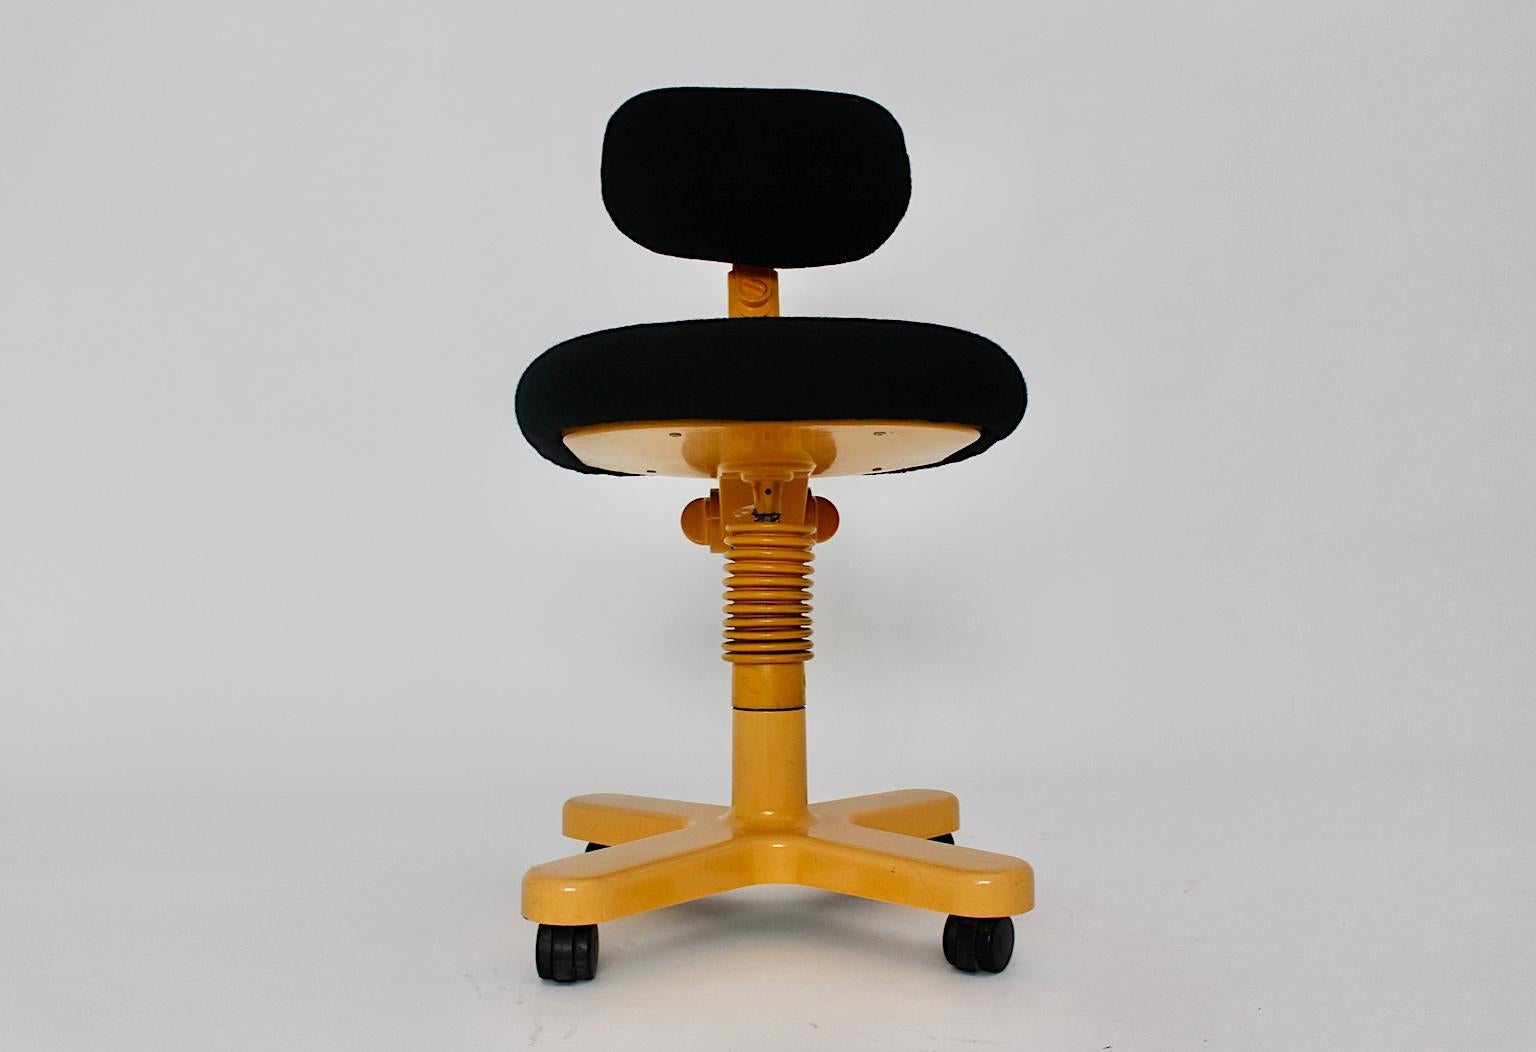 Aluminum Space Age Vintage Yellow Black Synthesis Desk Chair Ettore Sottsass for Olivetti